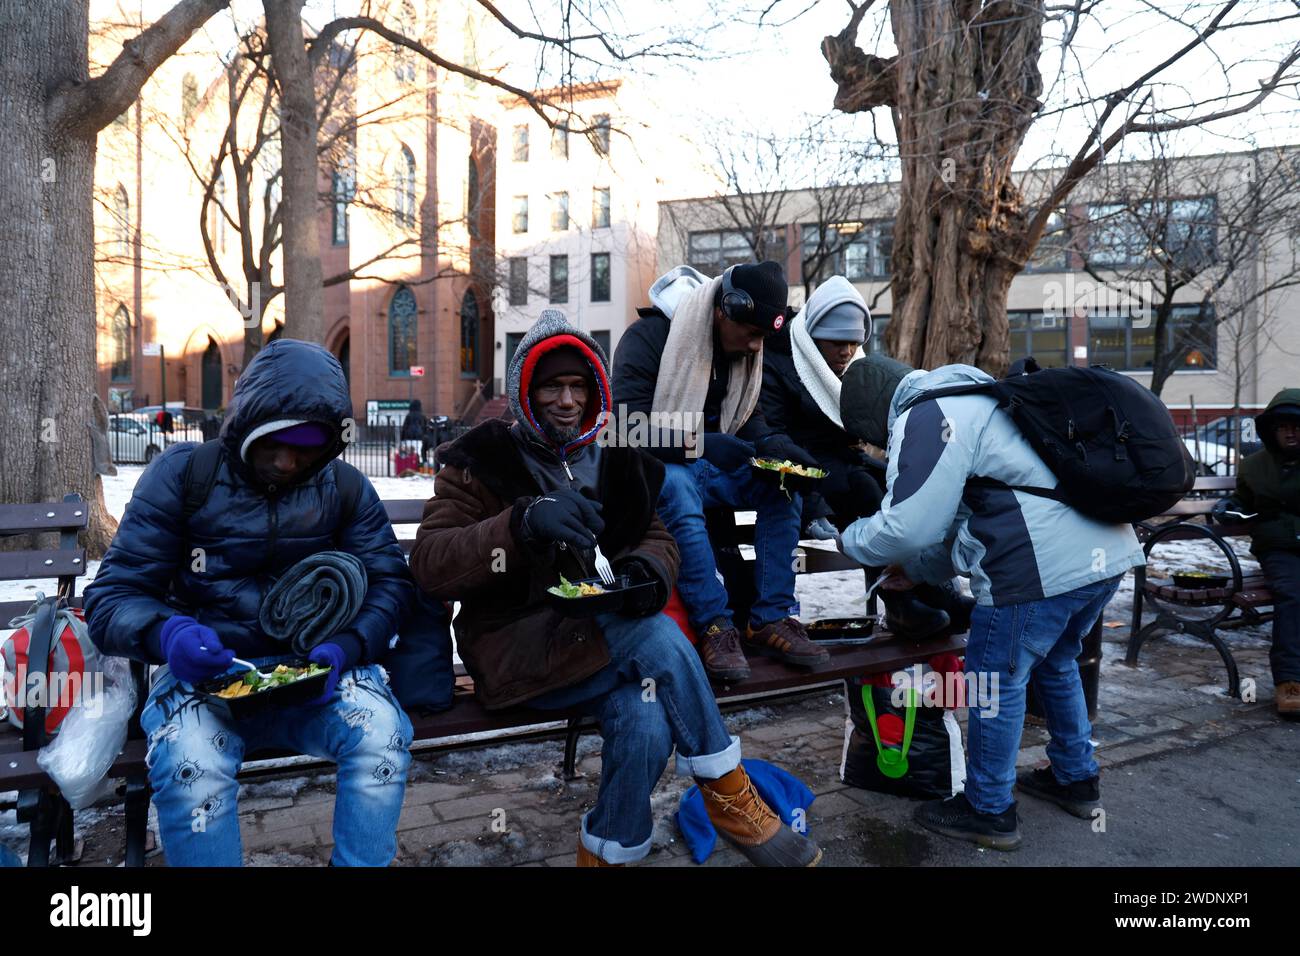 Migrants who have been forced out of shelters receive food and clothing donations as they await to be redirected to other shelters in Tompkins Square on the East Side of Manhattan on January, 21, 2024 in New York City. New York City imposed a new directive effectively displacing single adult migrants from shelters forcing them to reapply for new lodging after an initial period of 30 days. Several volunteer groups have been providing hot meals and warm clothing in the interim during the increasingly cold temperatures. (Photo by John Lamparski/SIPA USA). Stock Photo